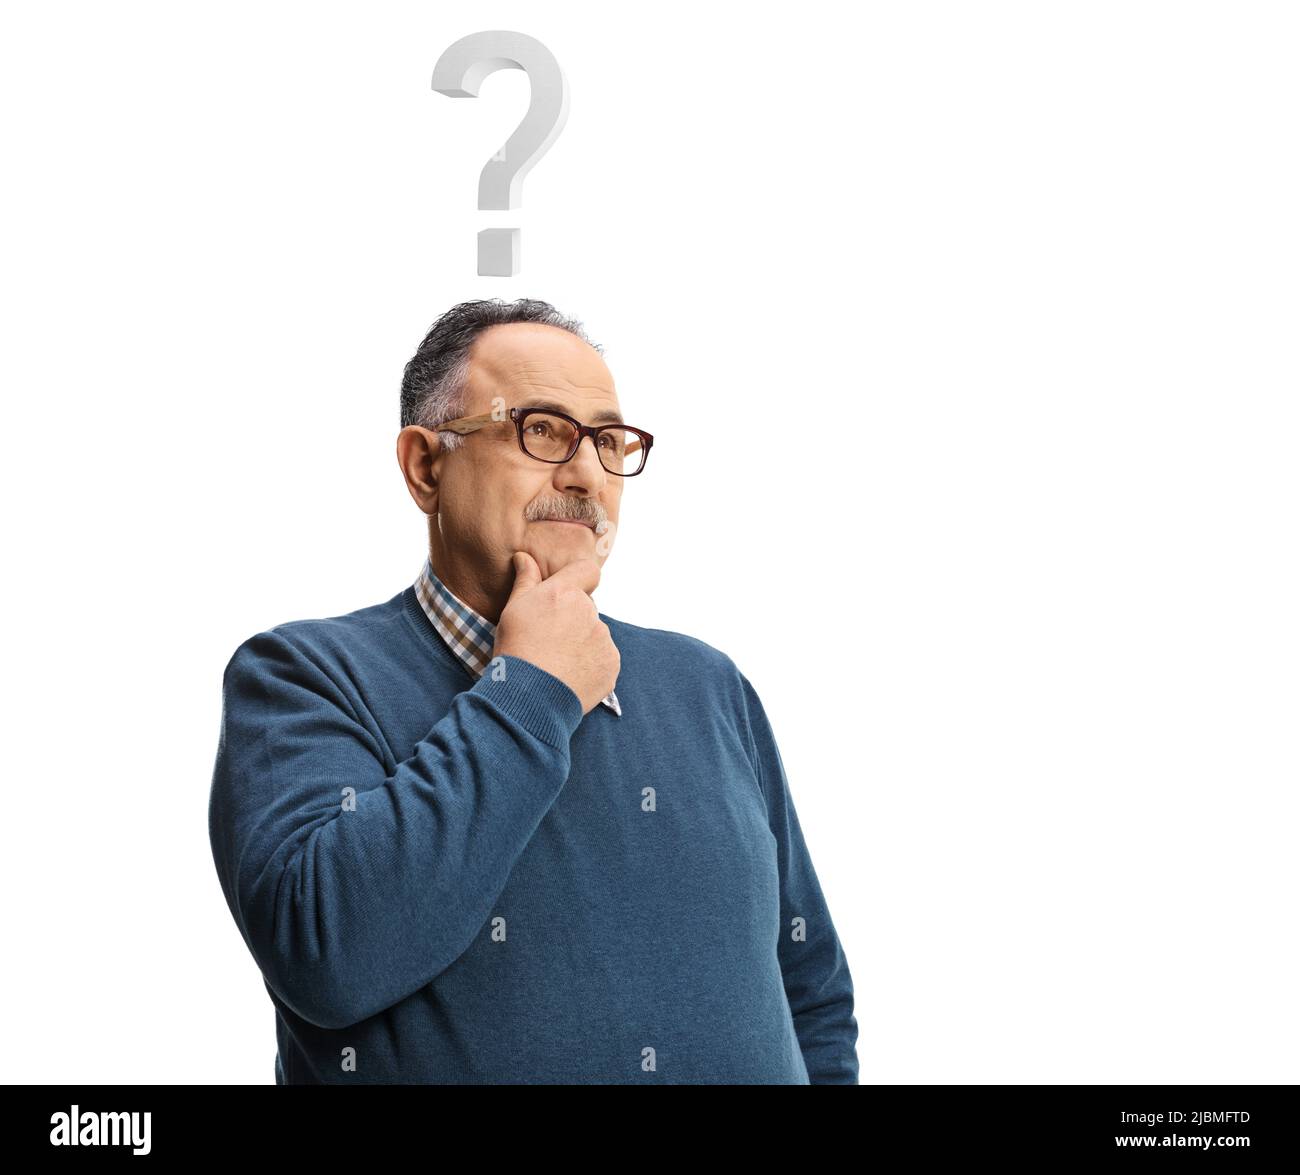 Pensive mature man standing and thinking with a question mark above his head isolated on white background Stock Photo